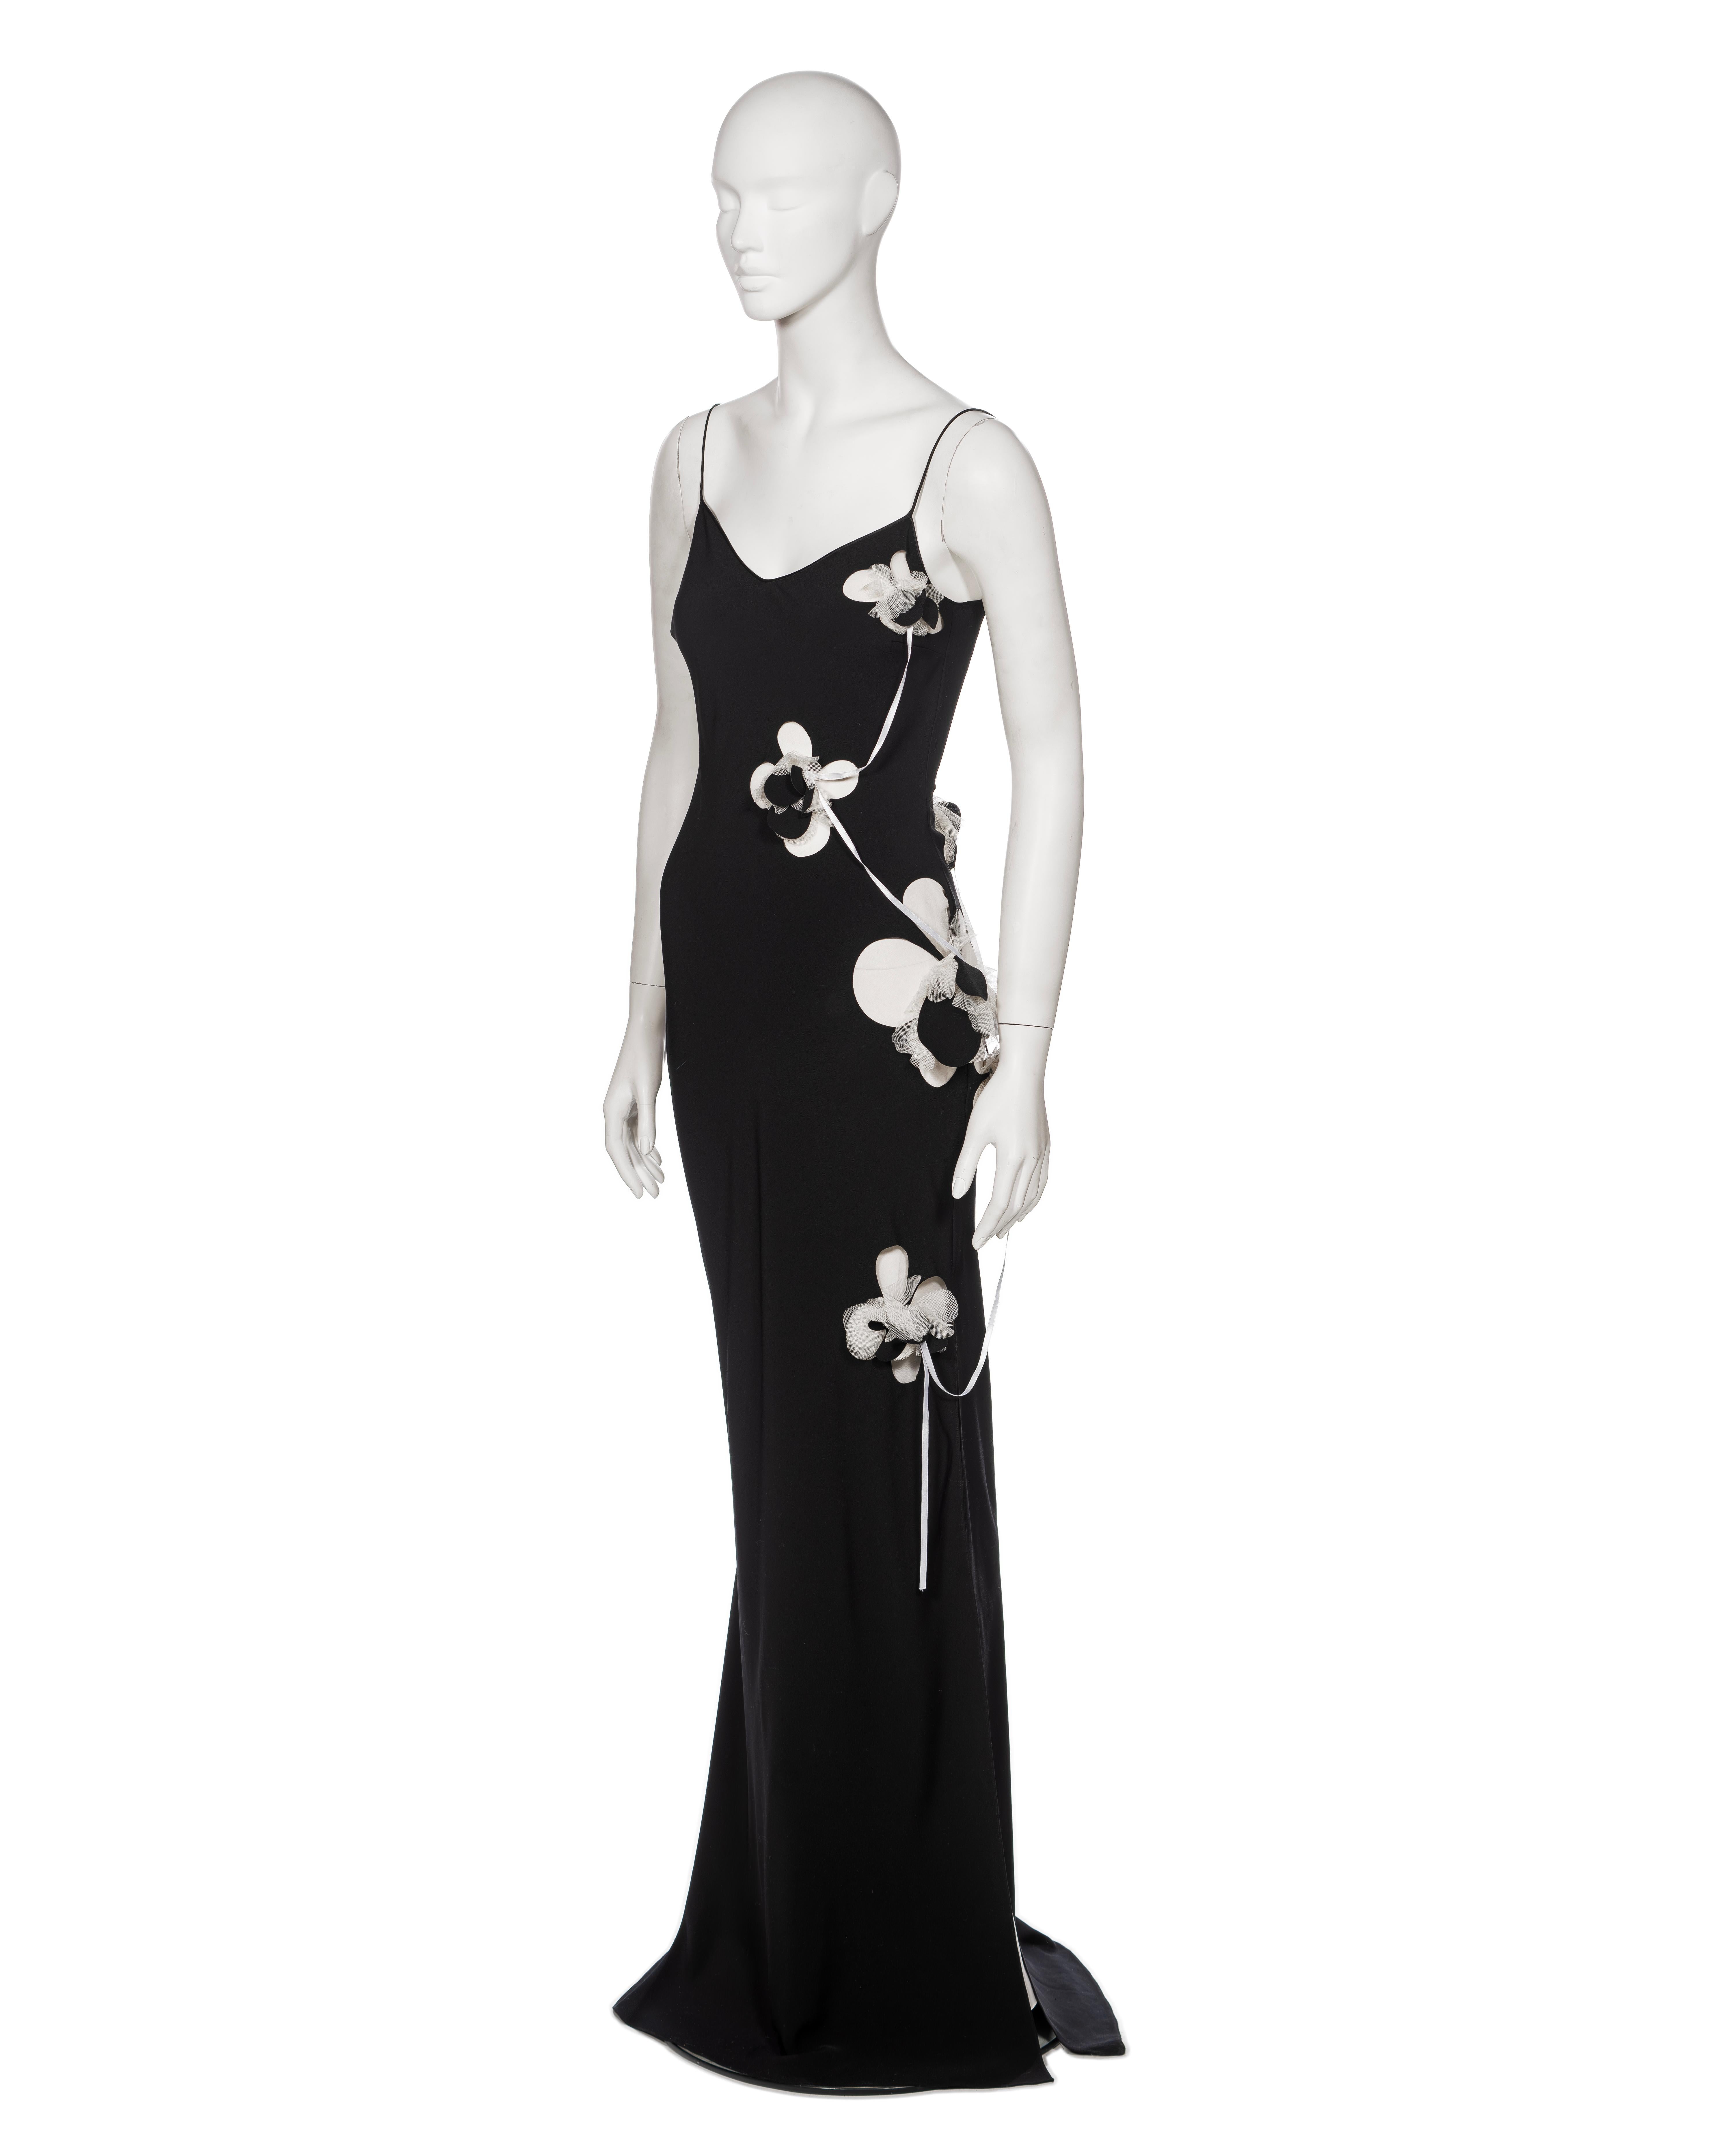 Women's John Galliano Black Silk Slip Dress with Floral Appliqués and Ribbons, FW 2001 For Sale